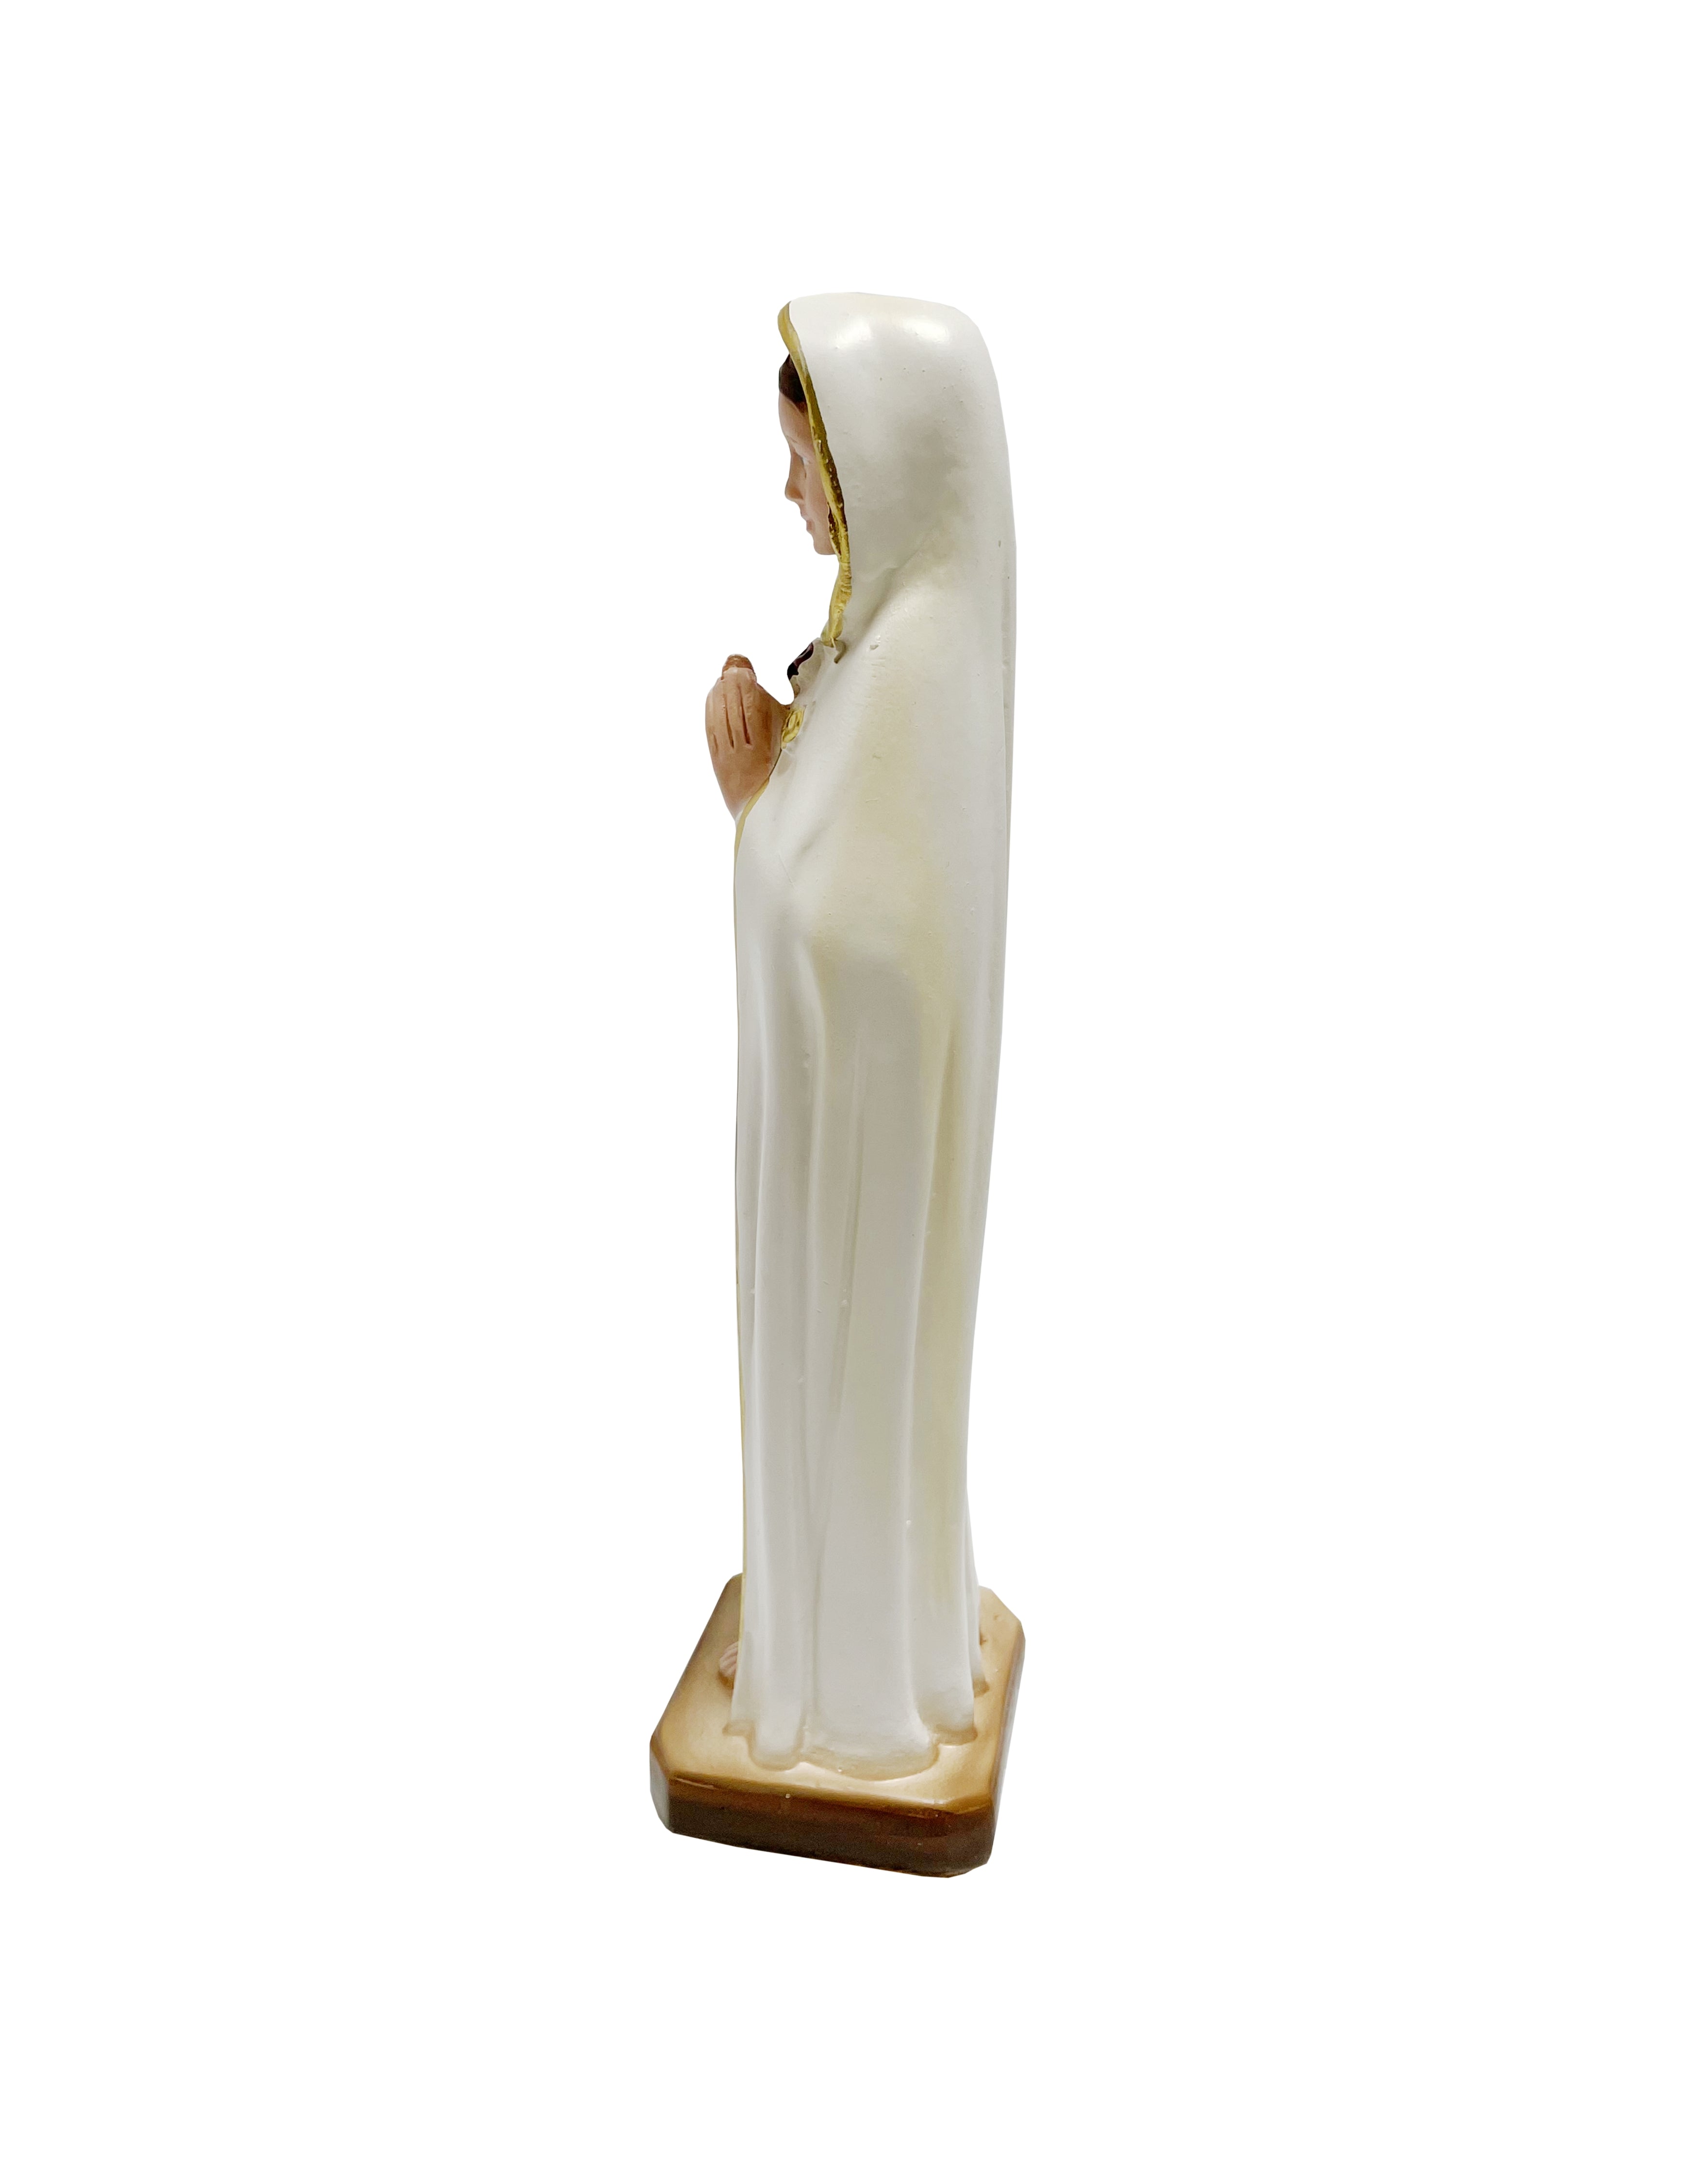 Religious statue of Our Lady of Mystic Rose 8.5" height